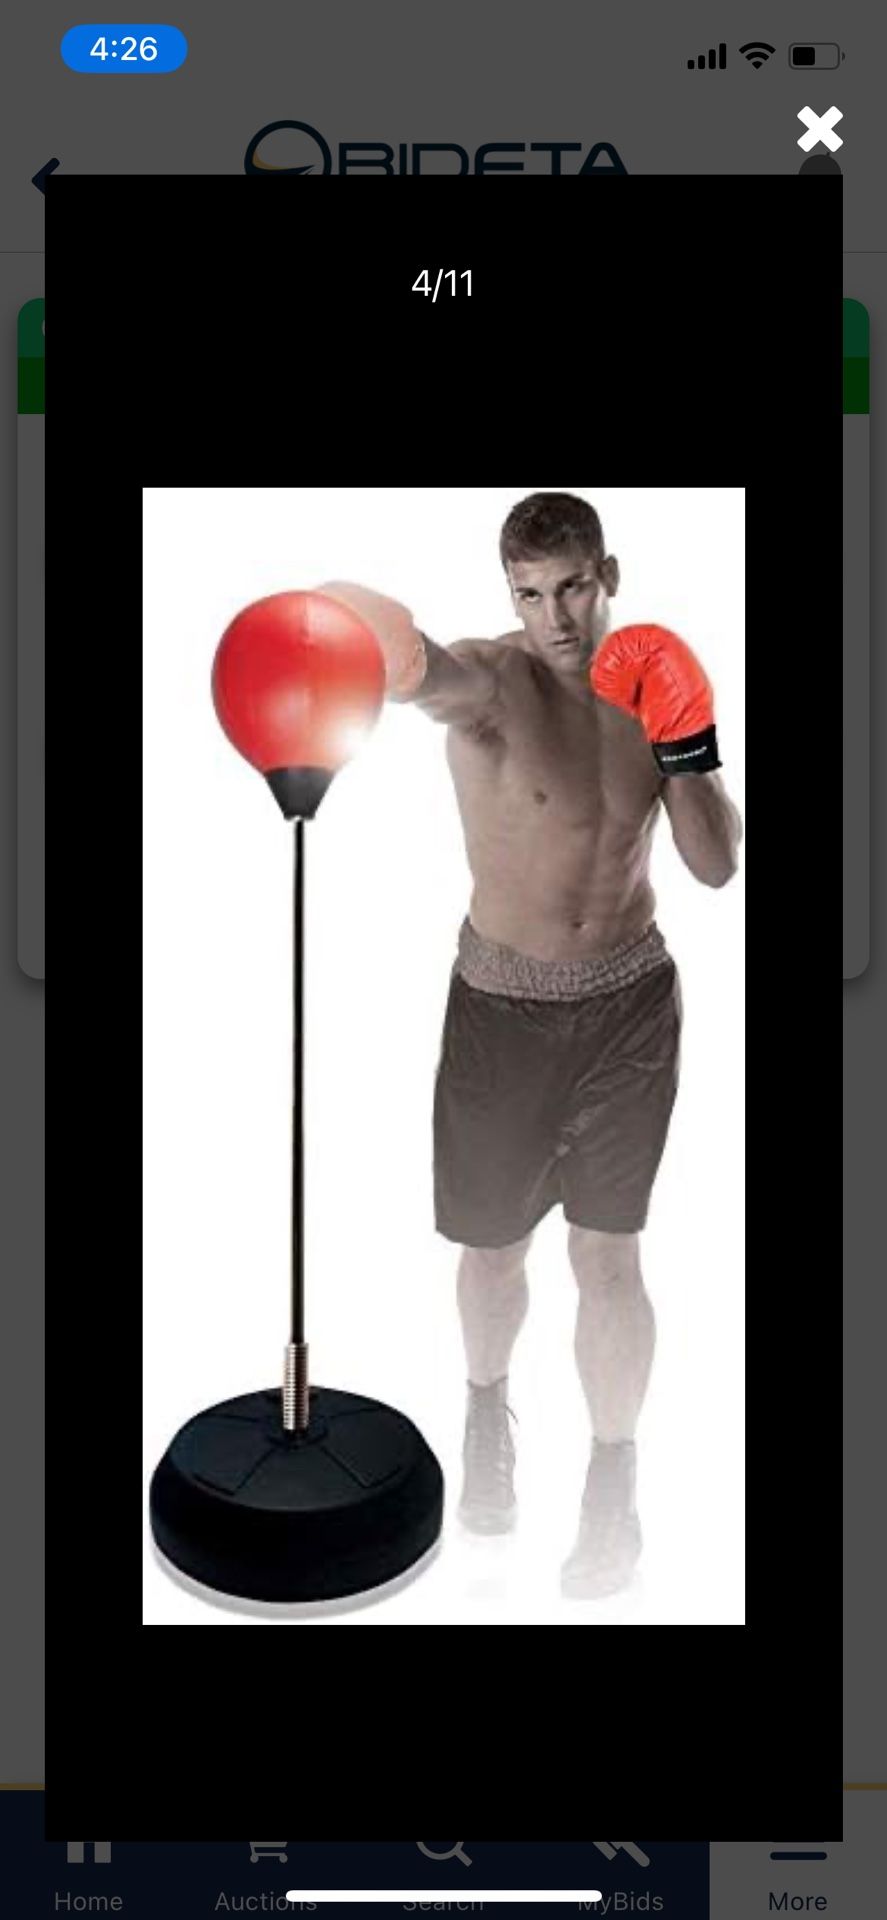 Punching Bag With stand